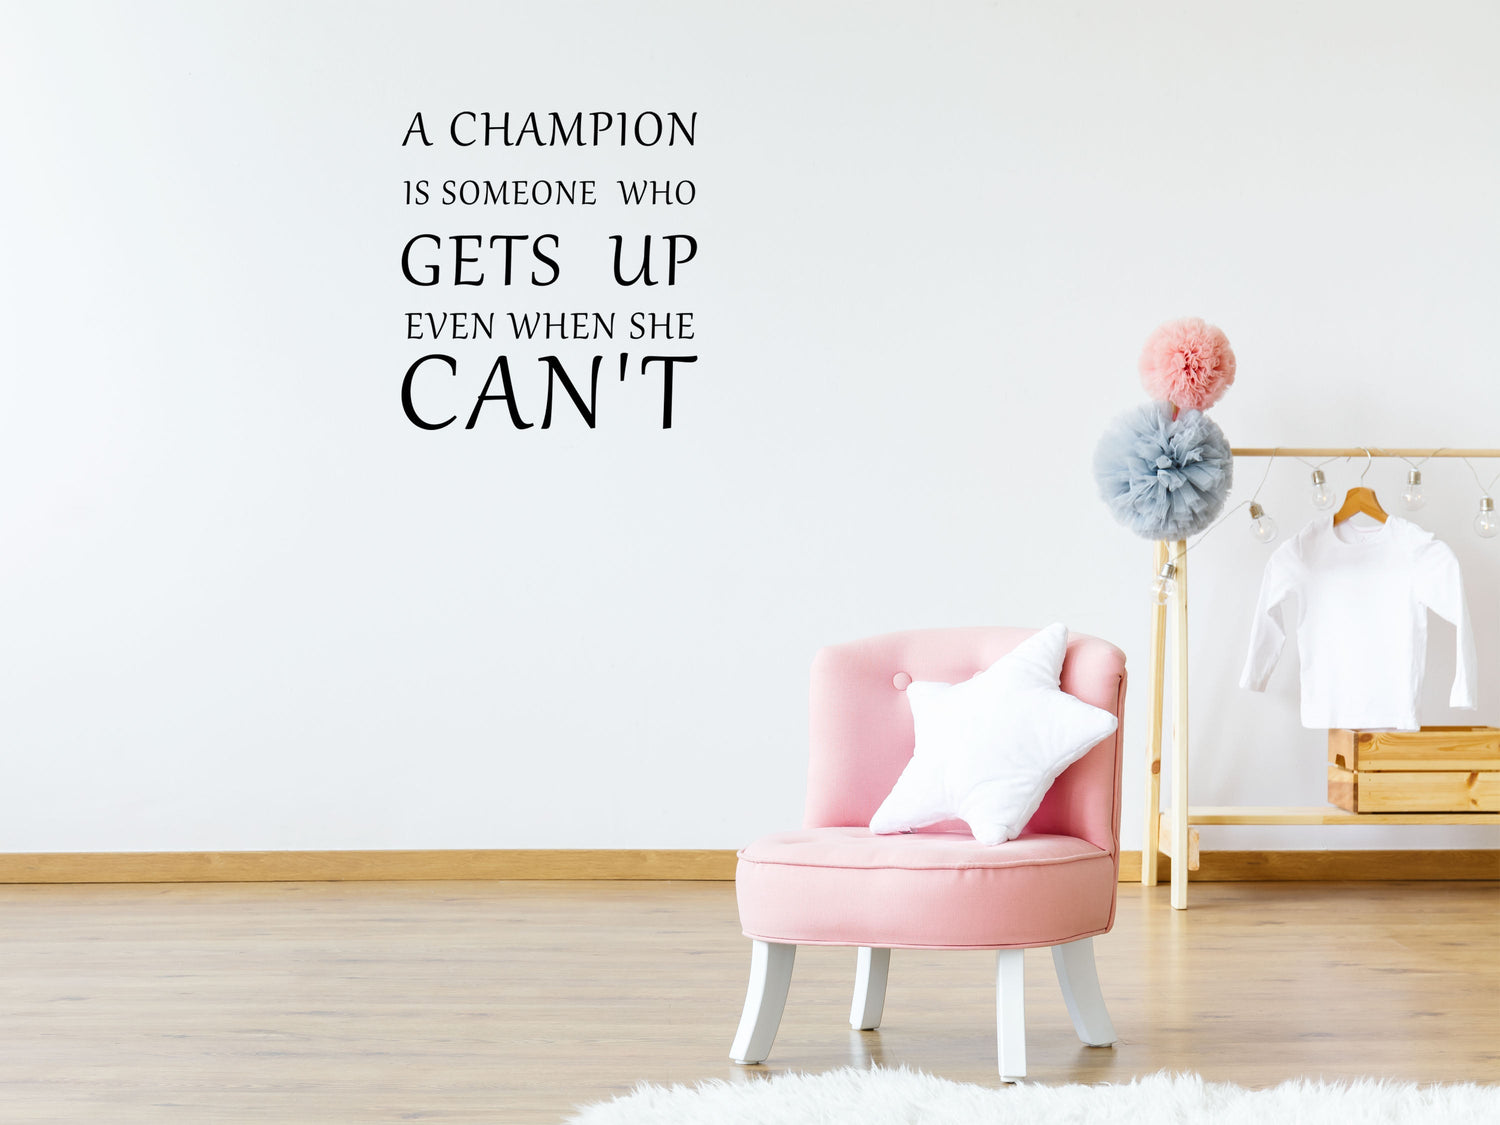 A Champion Is Someone Who Gets Up Even When She Can't Wall Decal Champion Vinyl Wall - Motivational Wall Quote Decal - Inspirational Quote Vinyl Wall Decal Title Done 